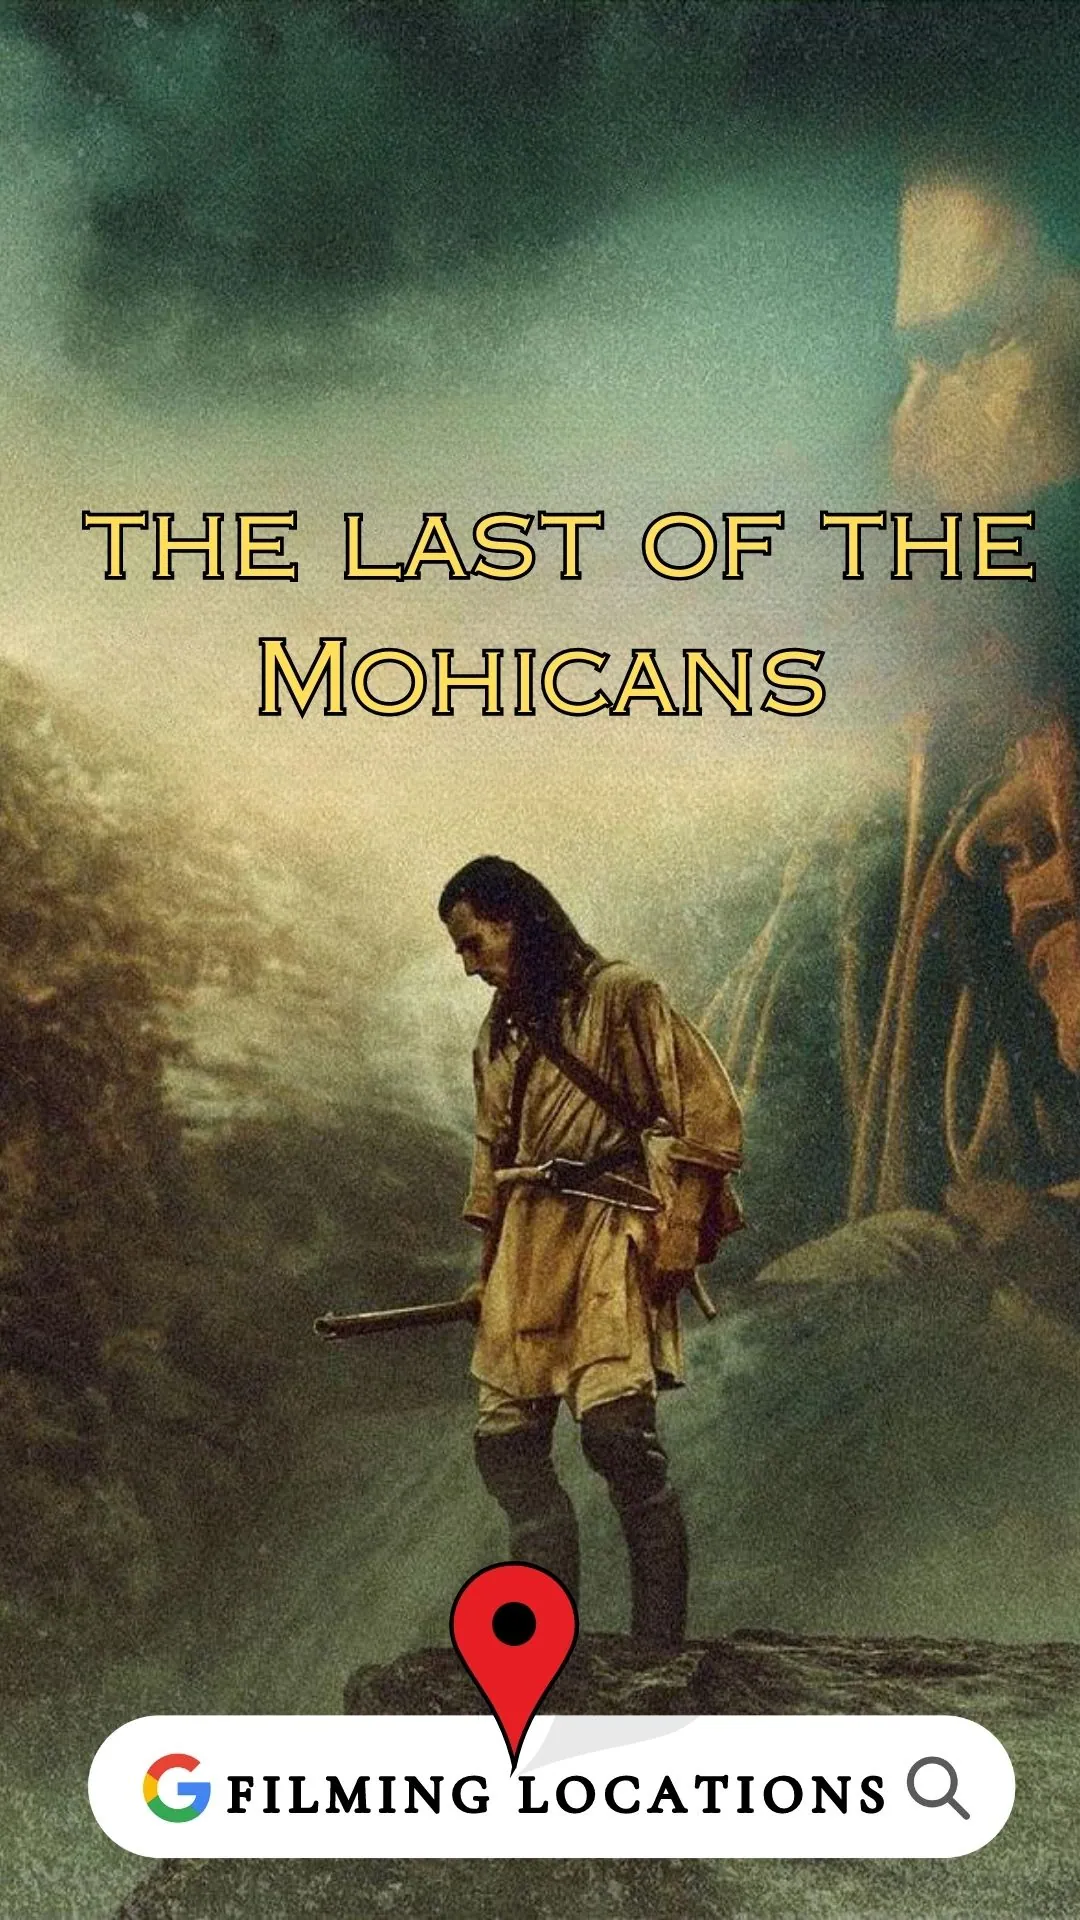 The Last of the Mohicans Filming Location (1992)